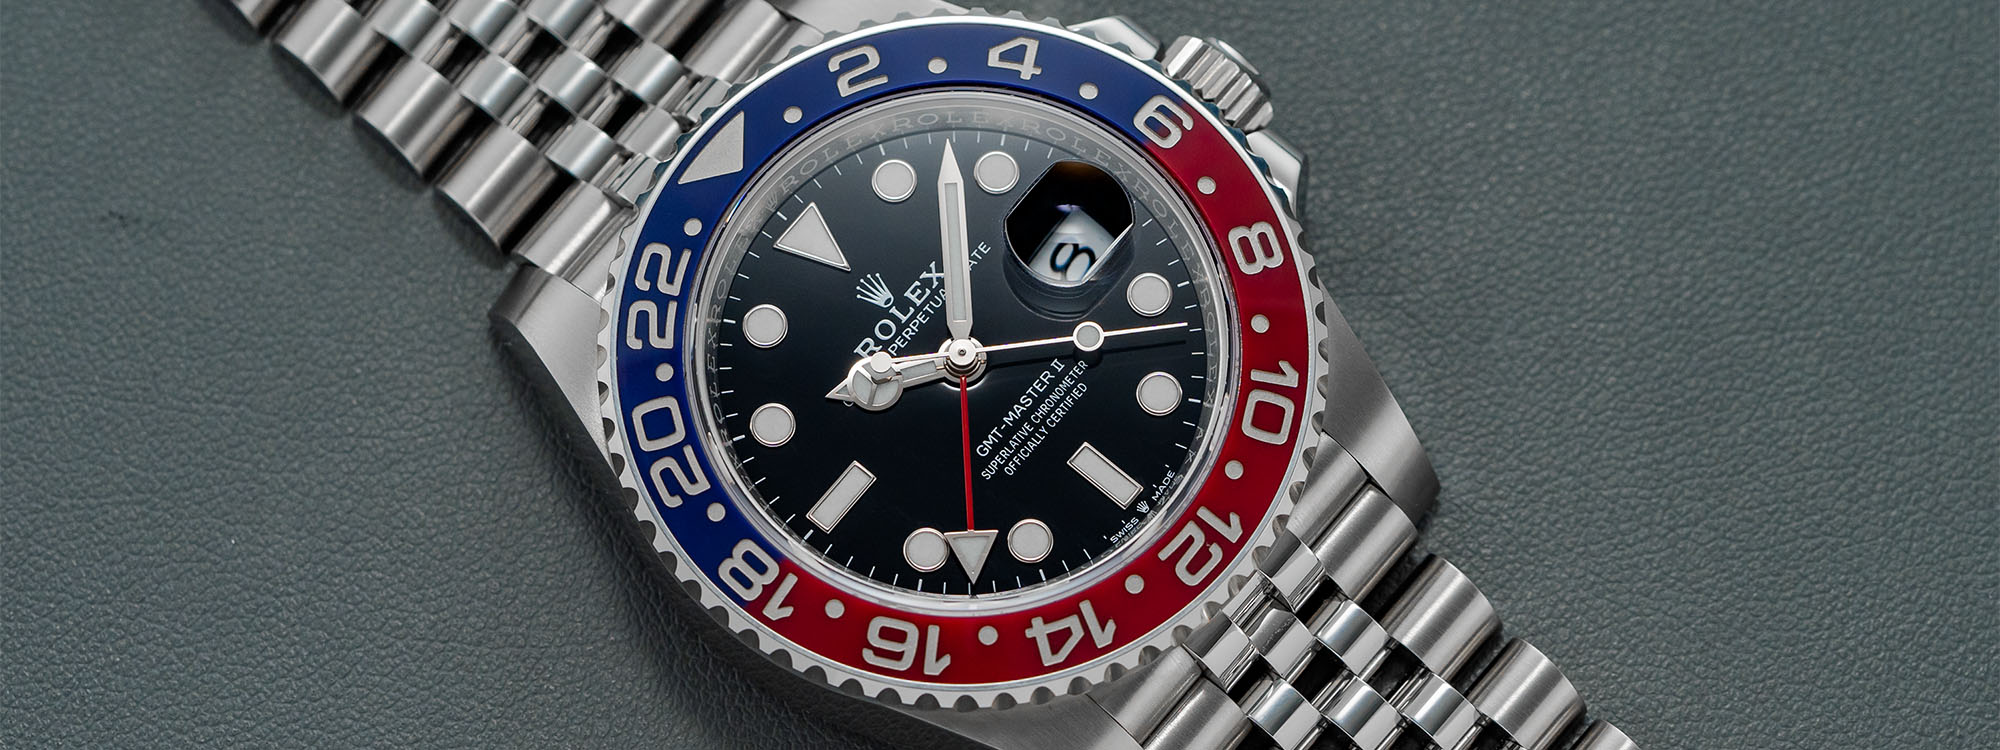 Rolex's Certified Pre-Owned Program Hits the U.S. Here's What to